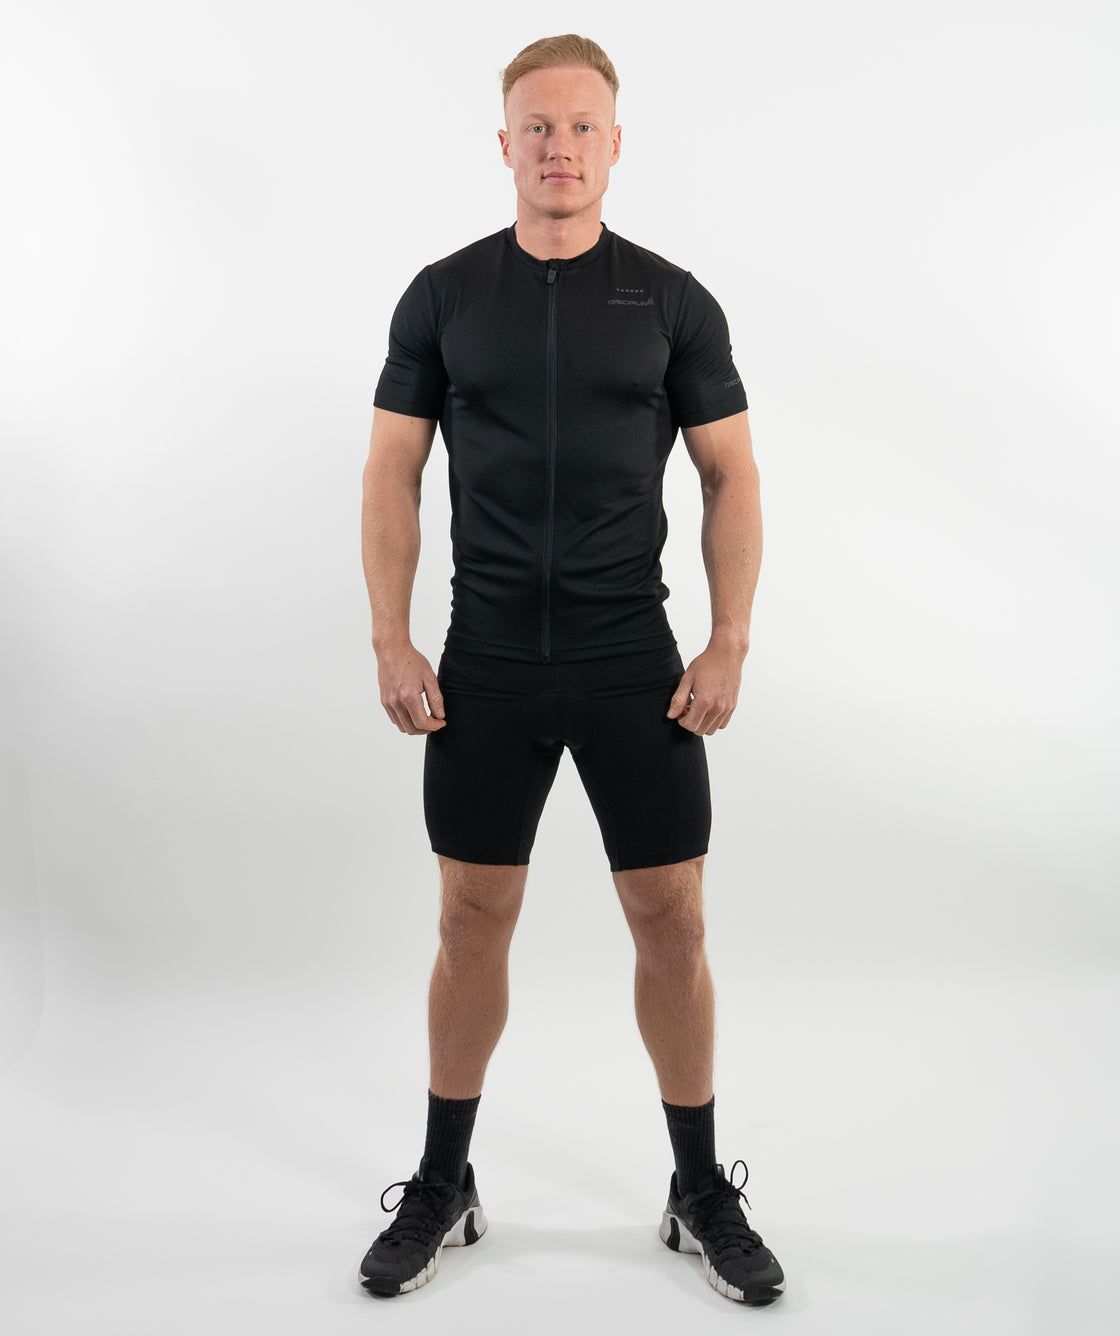 Cycle Jersey Top